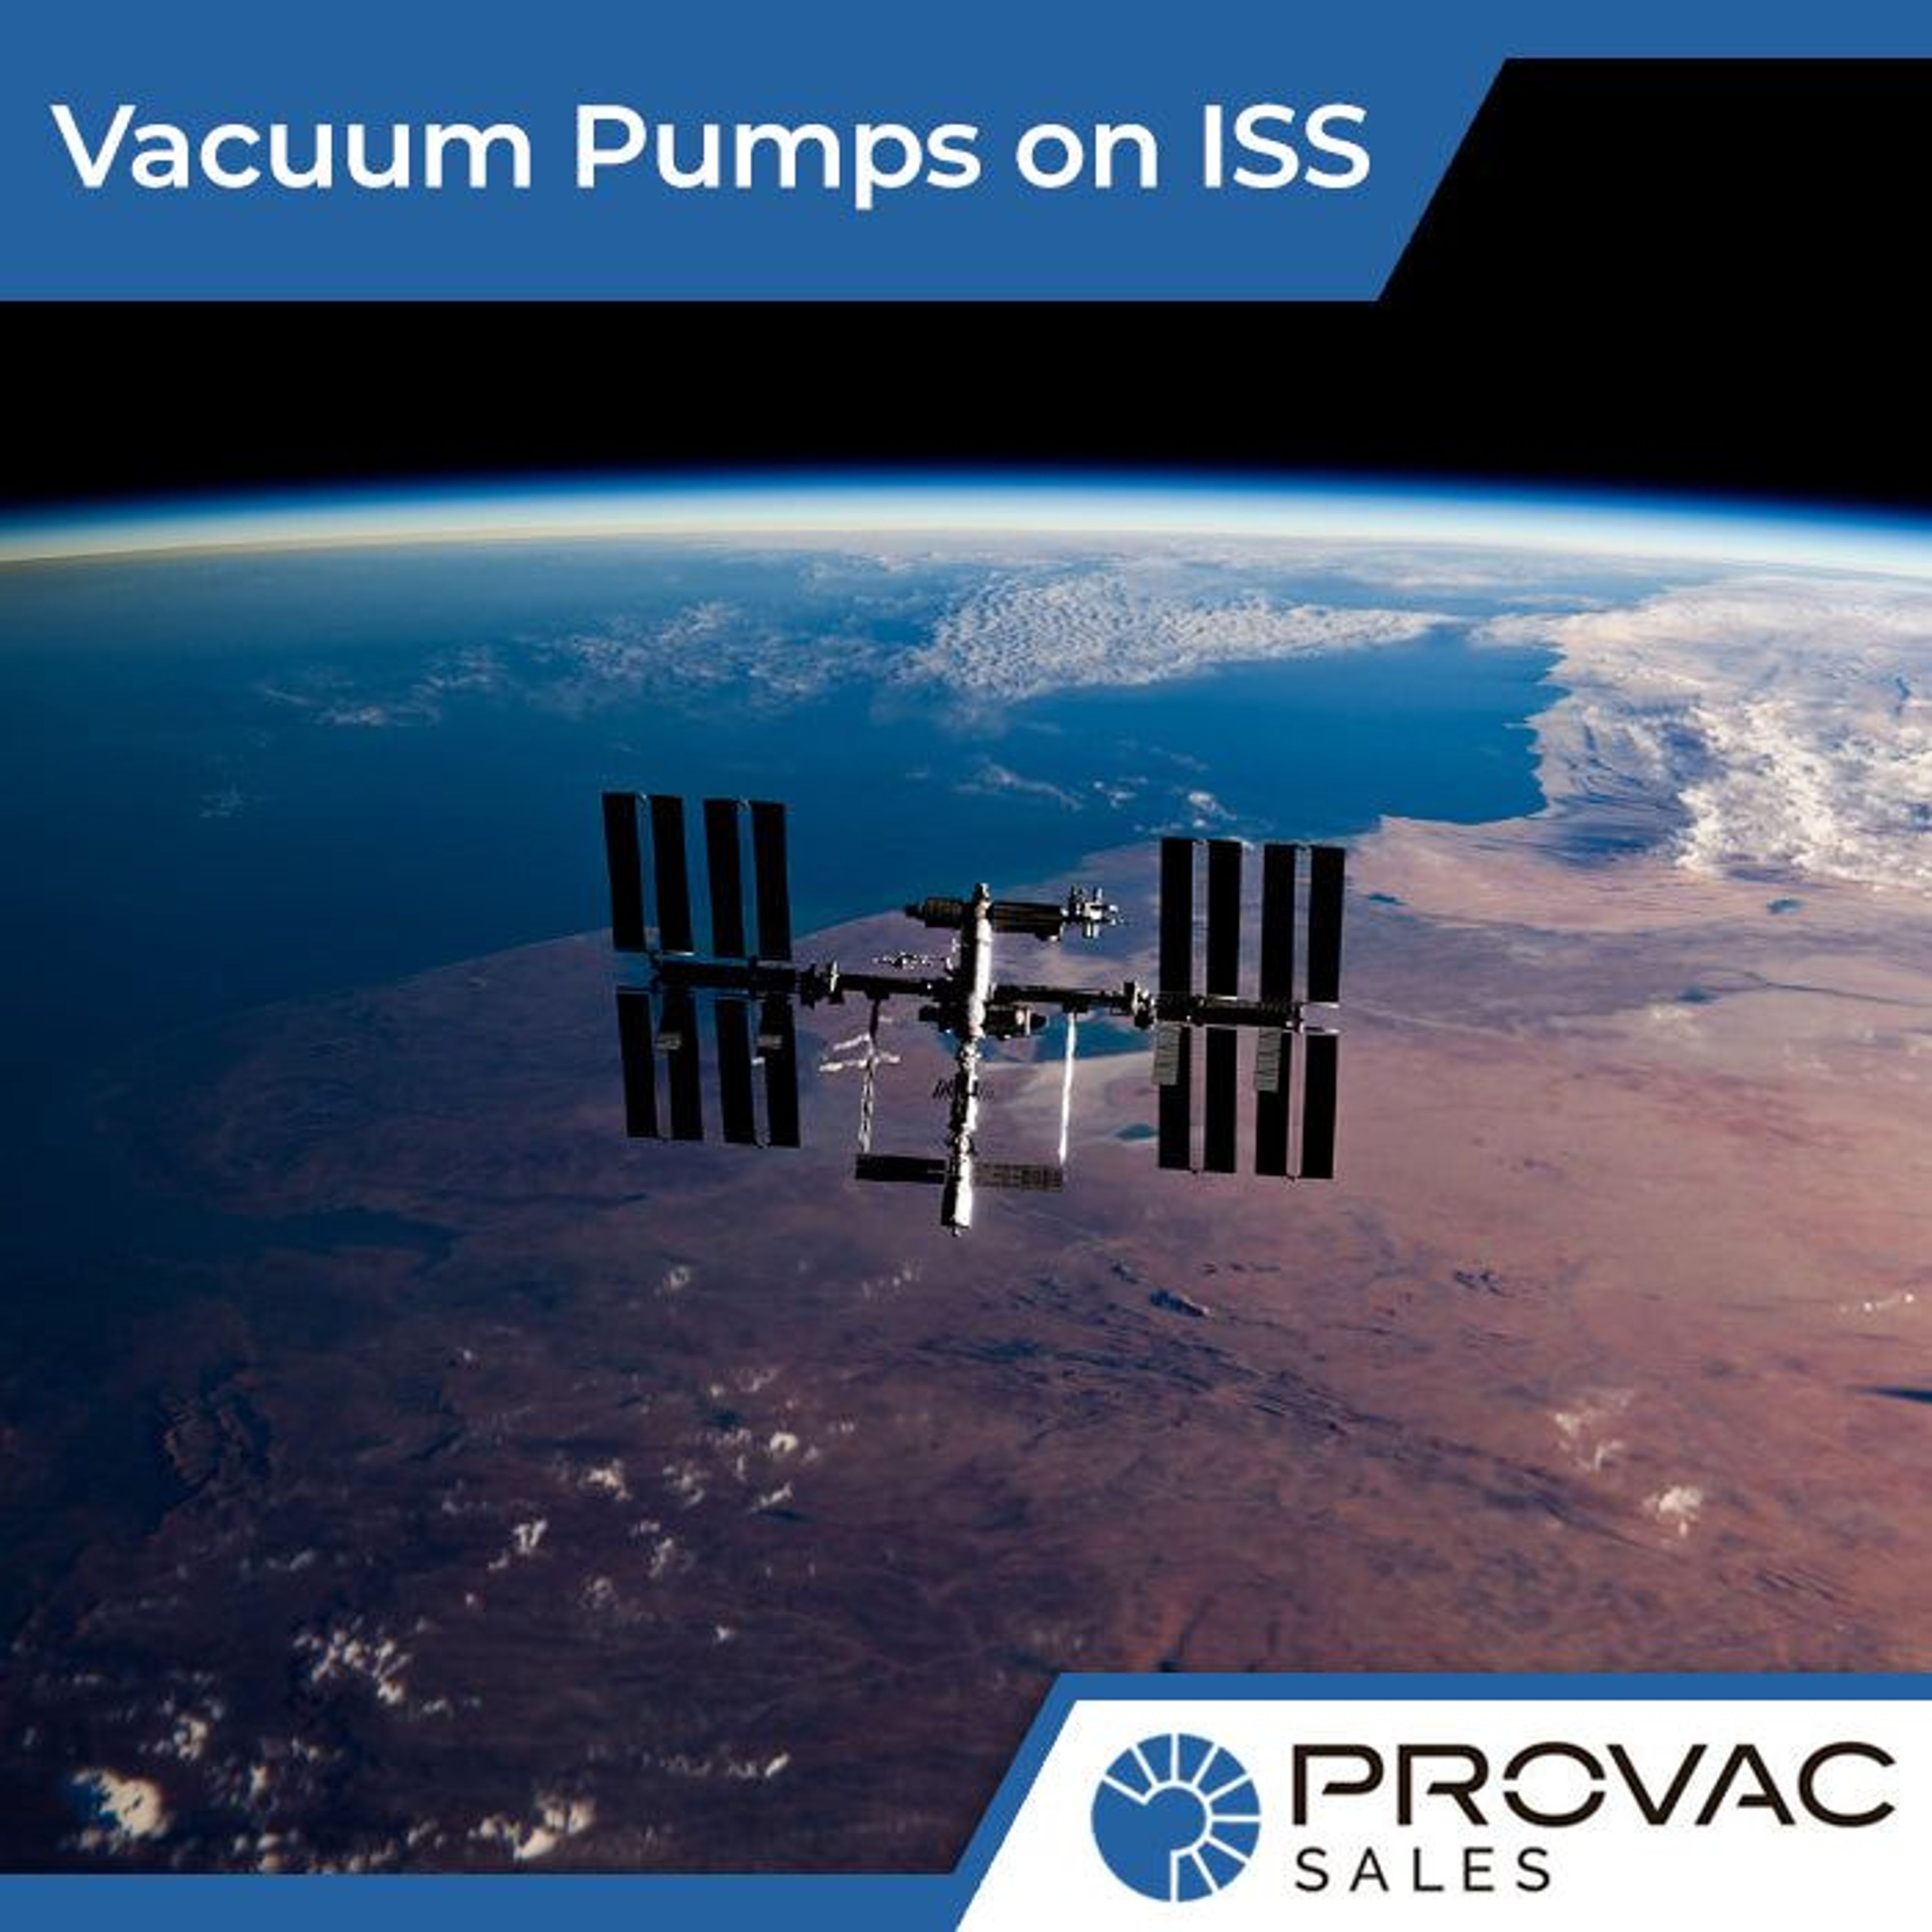 How Vacuum Pumps are Used on the ISS for Experimentation Background